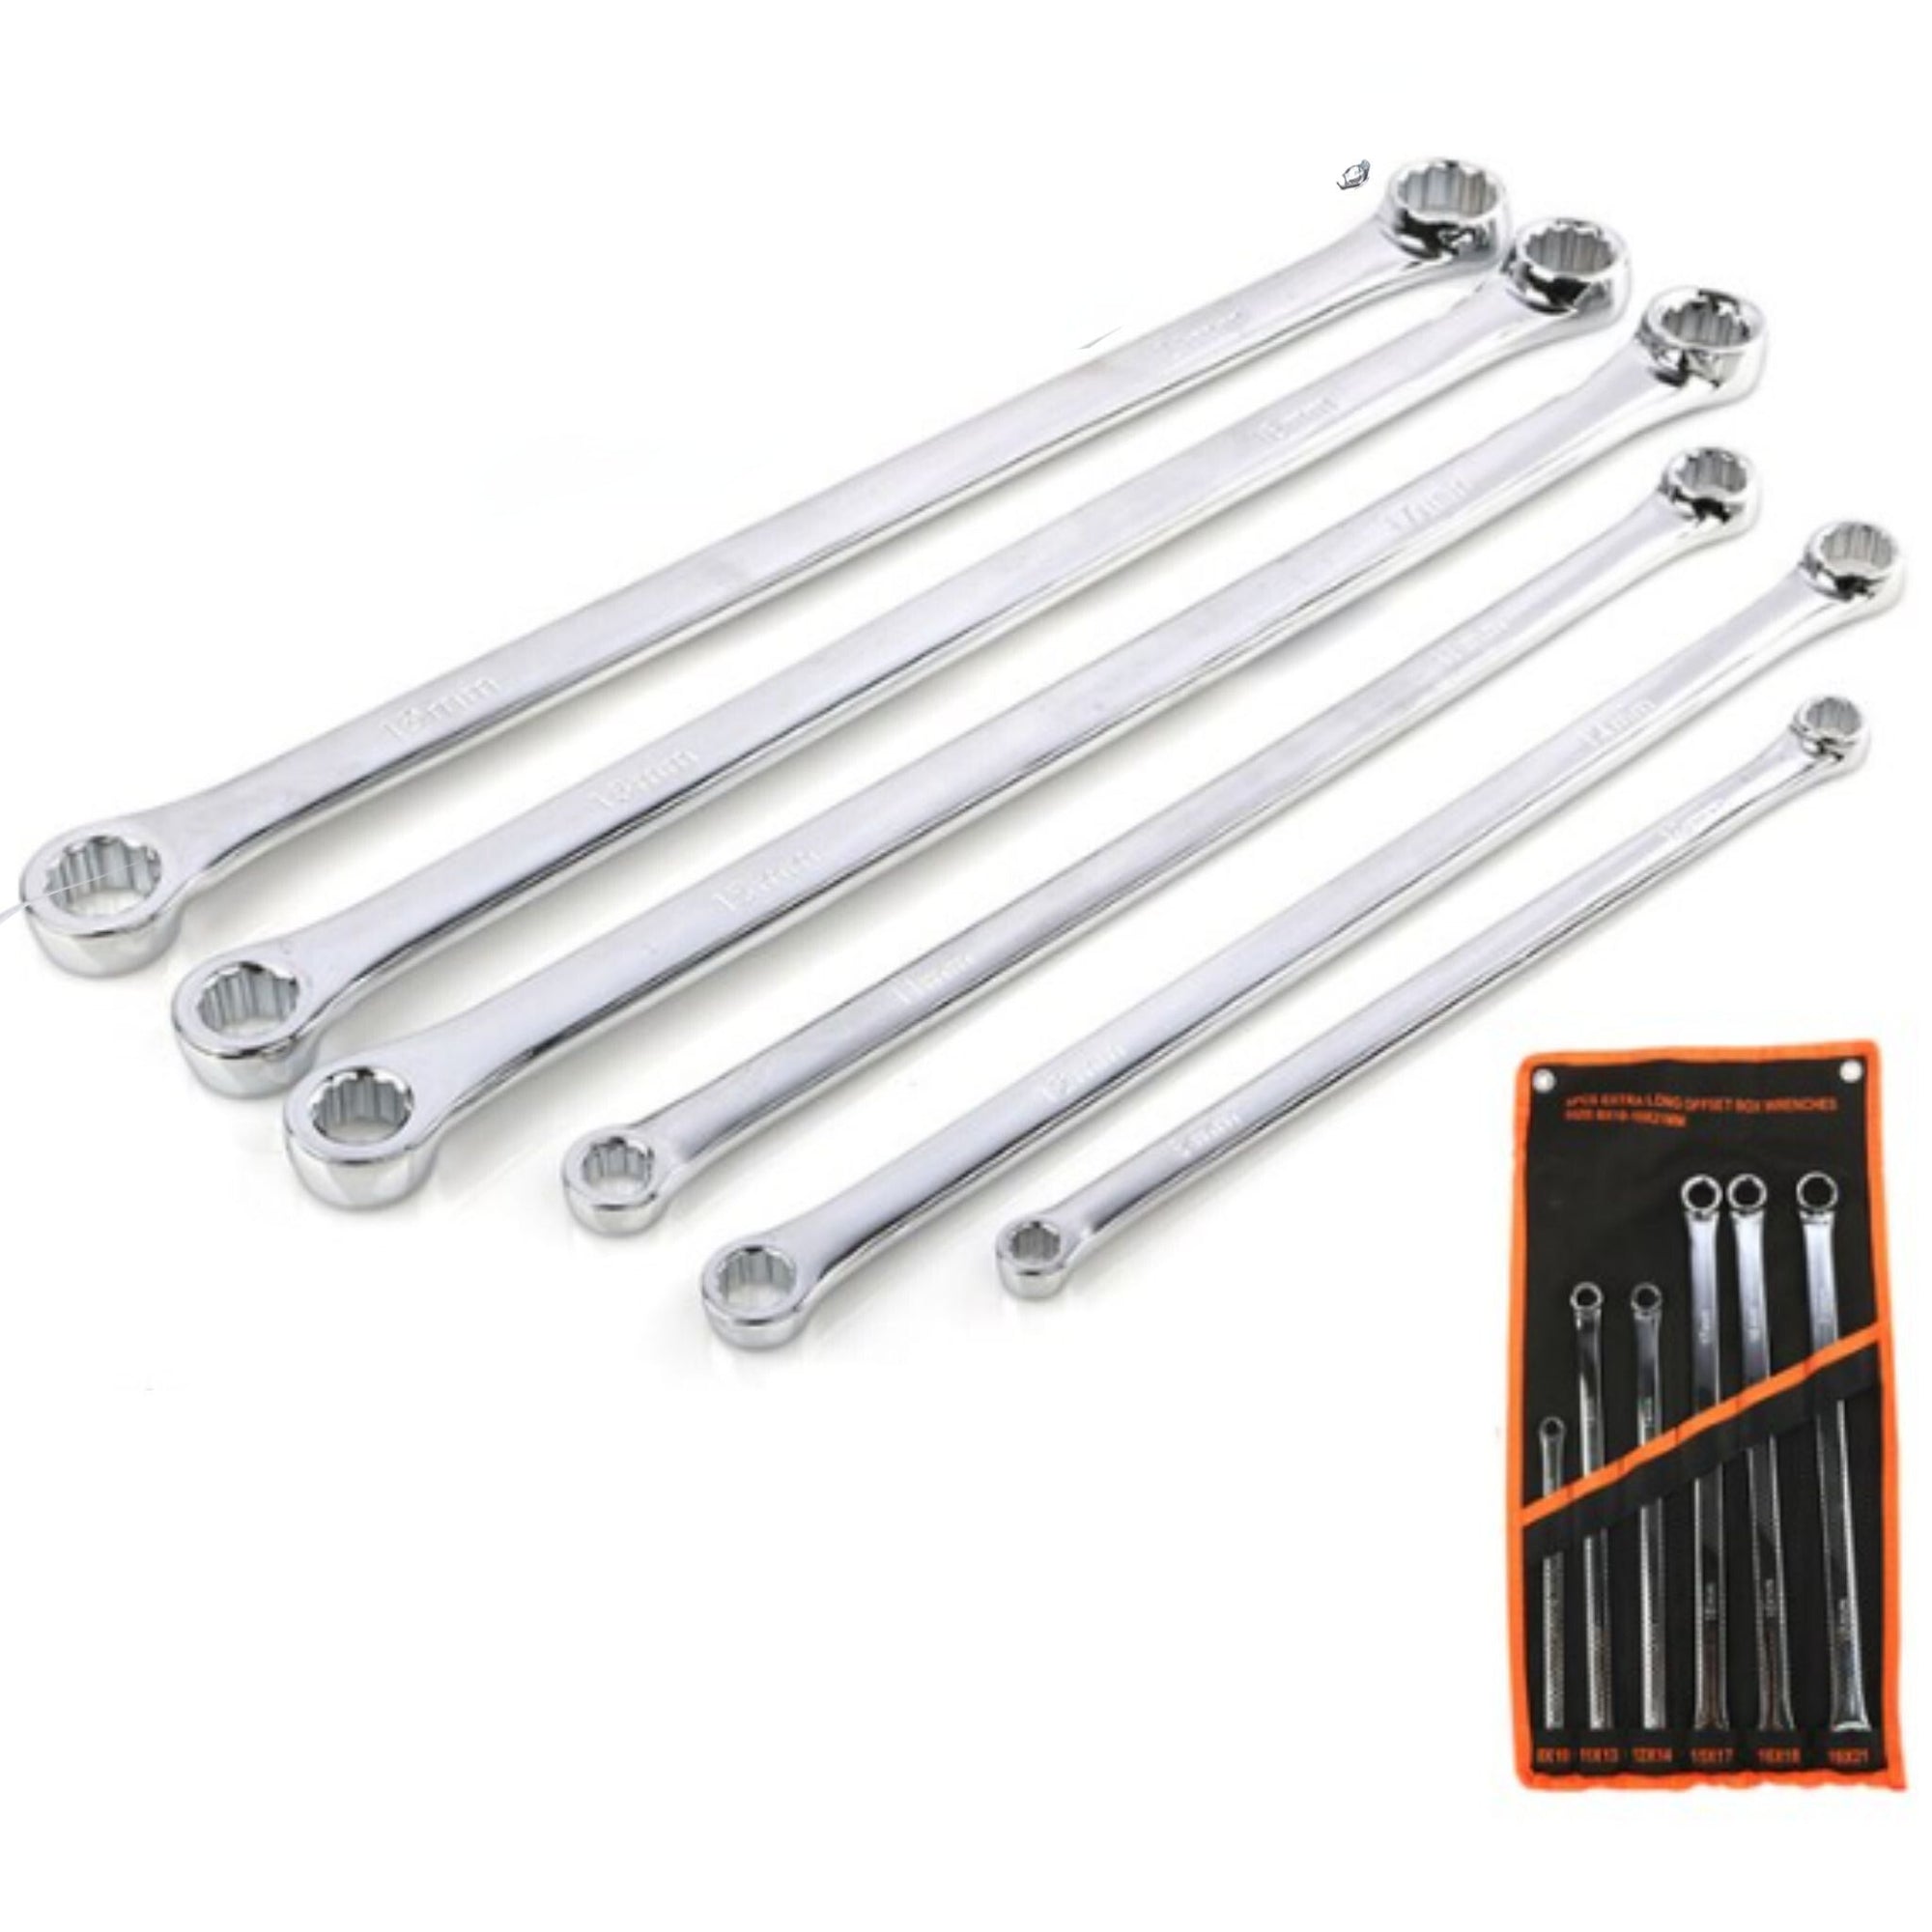 6 Piece Extra Long Offset Box Double Ring Spanner Set - (8mm - 21mm) - South East Clearance Centre